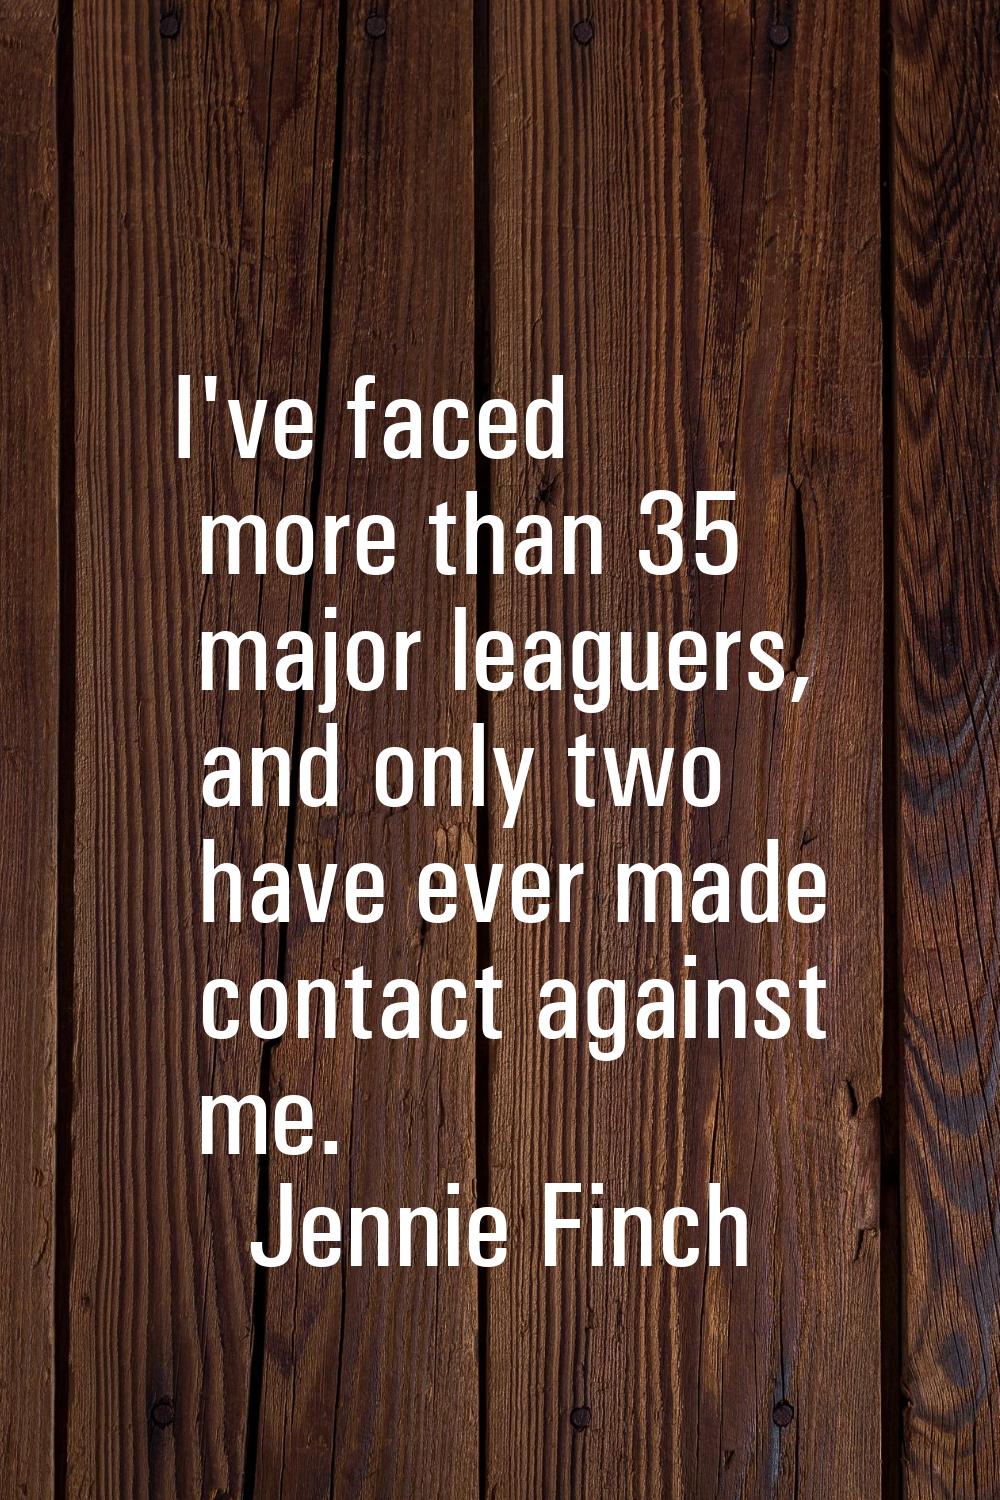 I've faced more than 35 major leaguers, and only two have ever made contact against me.